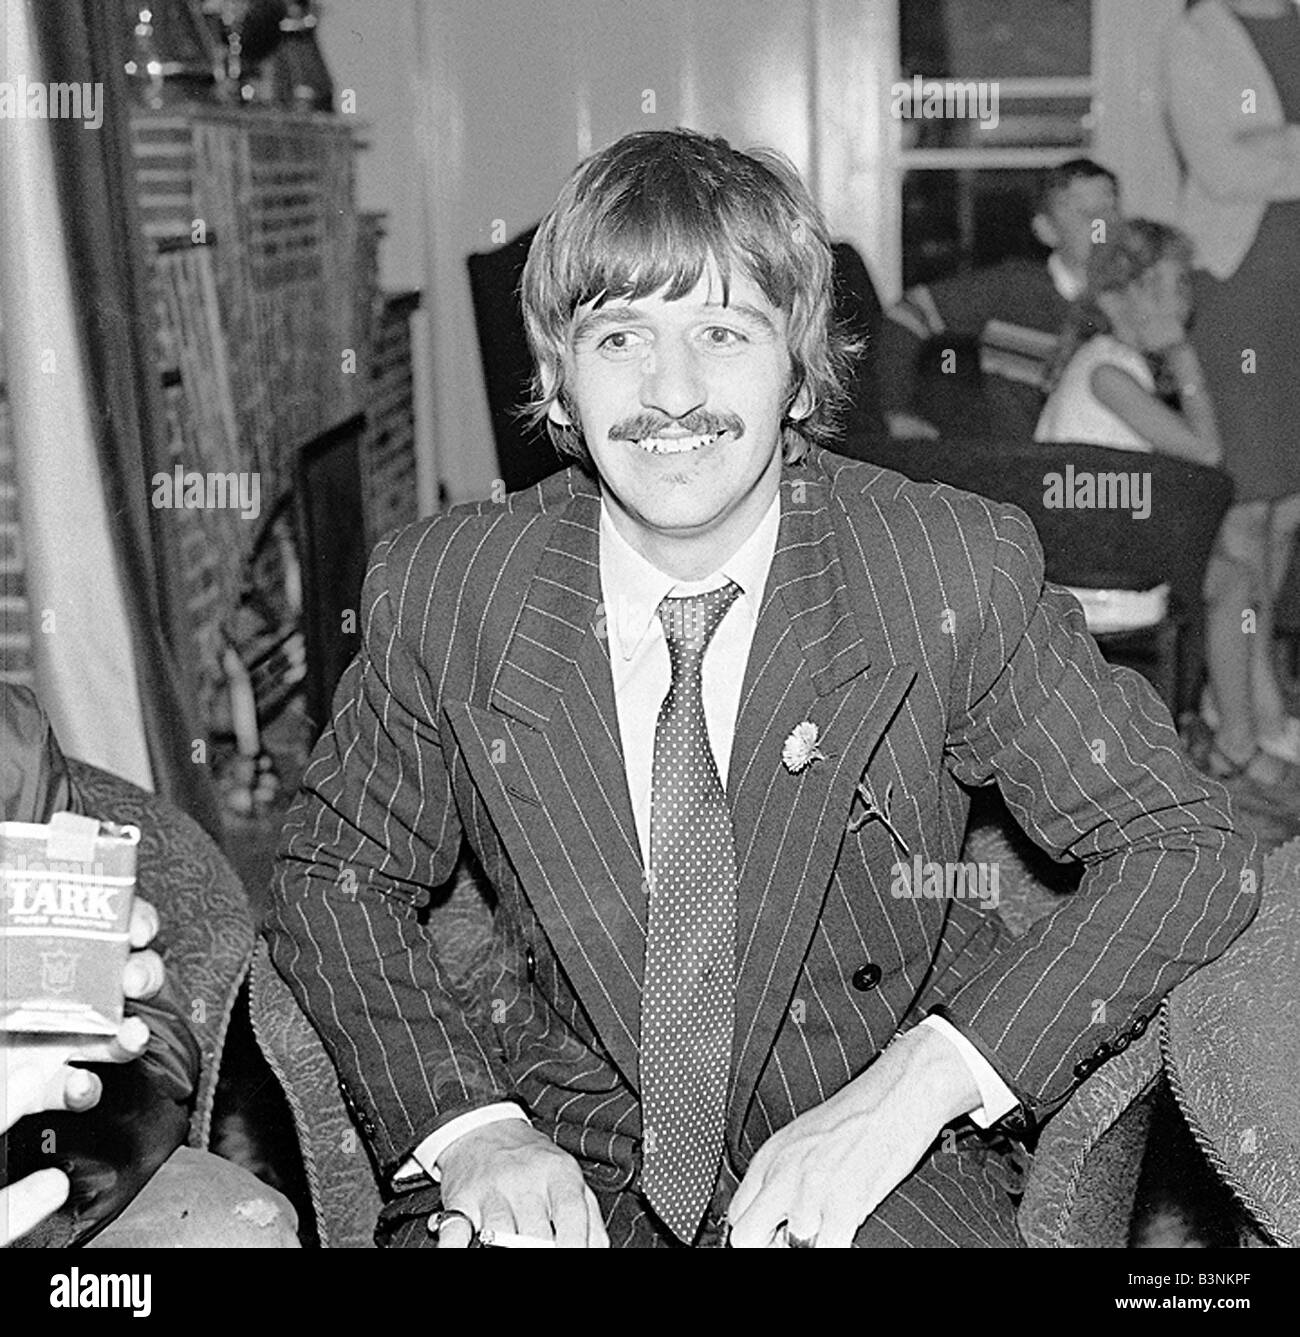 Beatles files 1967 Ringo Starr of The Beatles during the Magical Mystery tour September 1967 Stock Photo